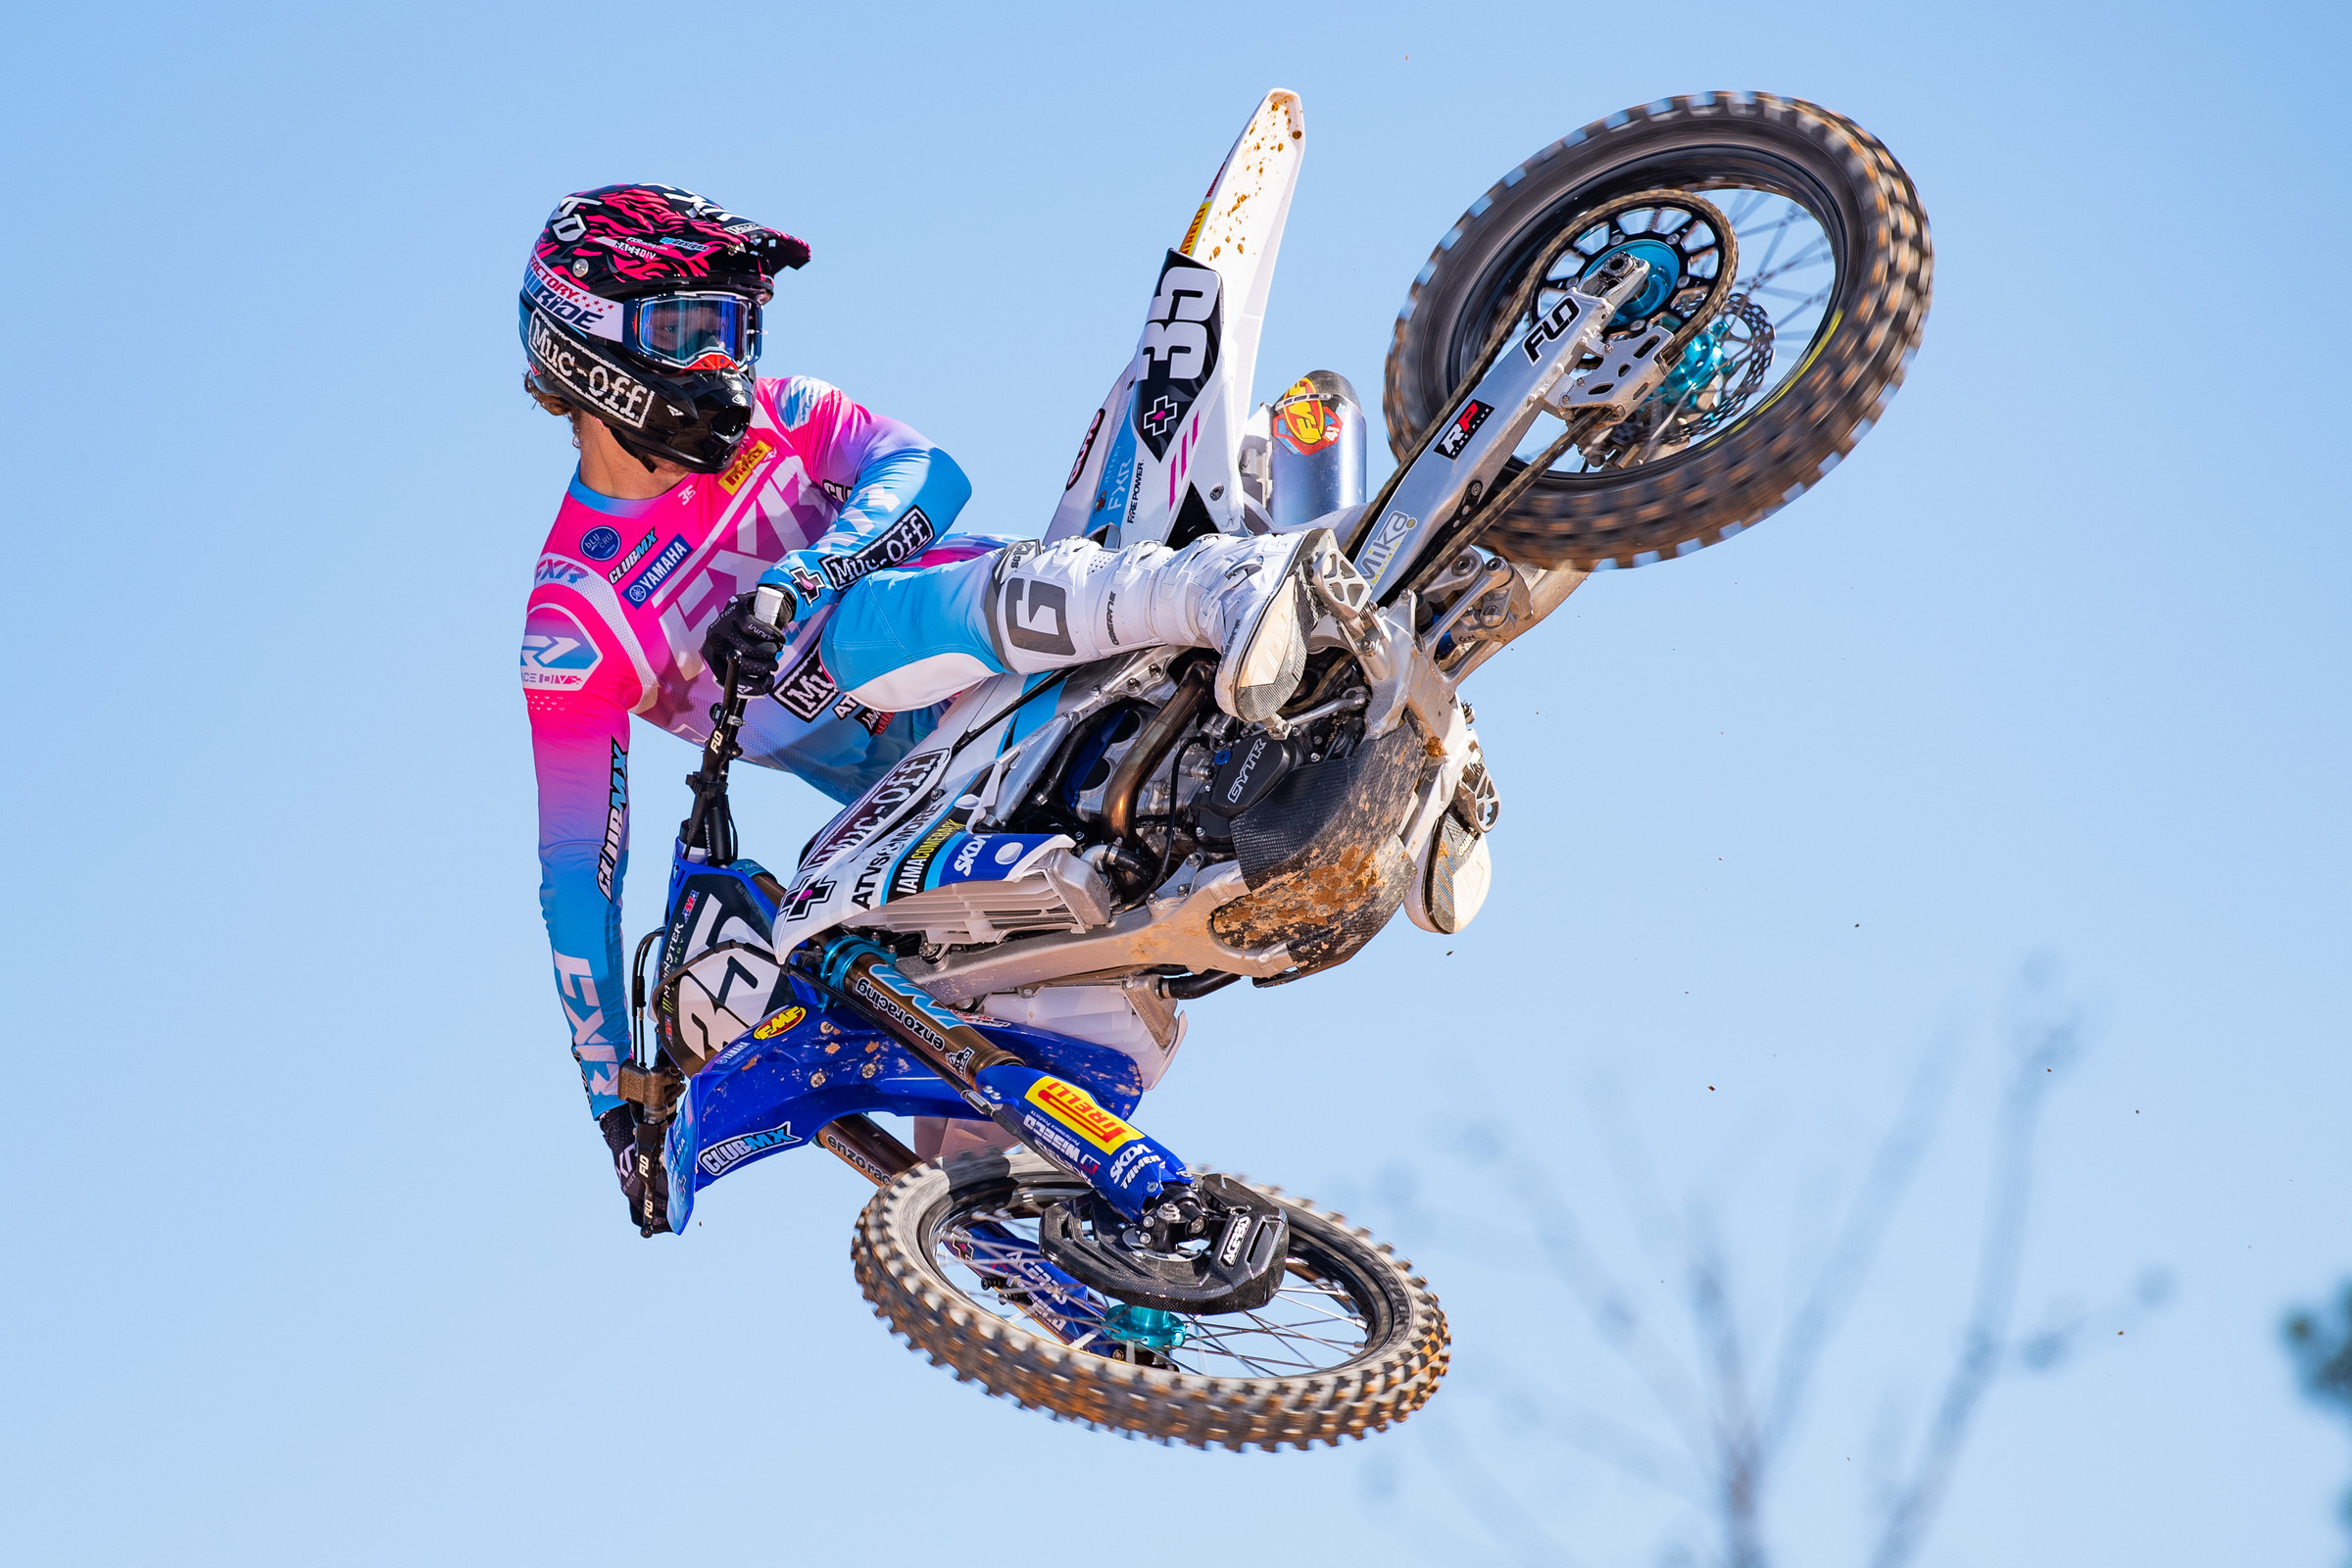 Introducing the Muc-Off FXR ClubMX Supercross Team